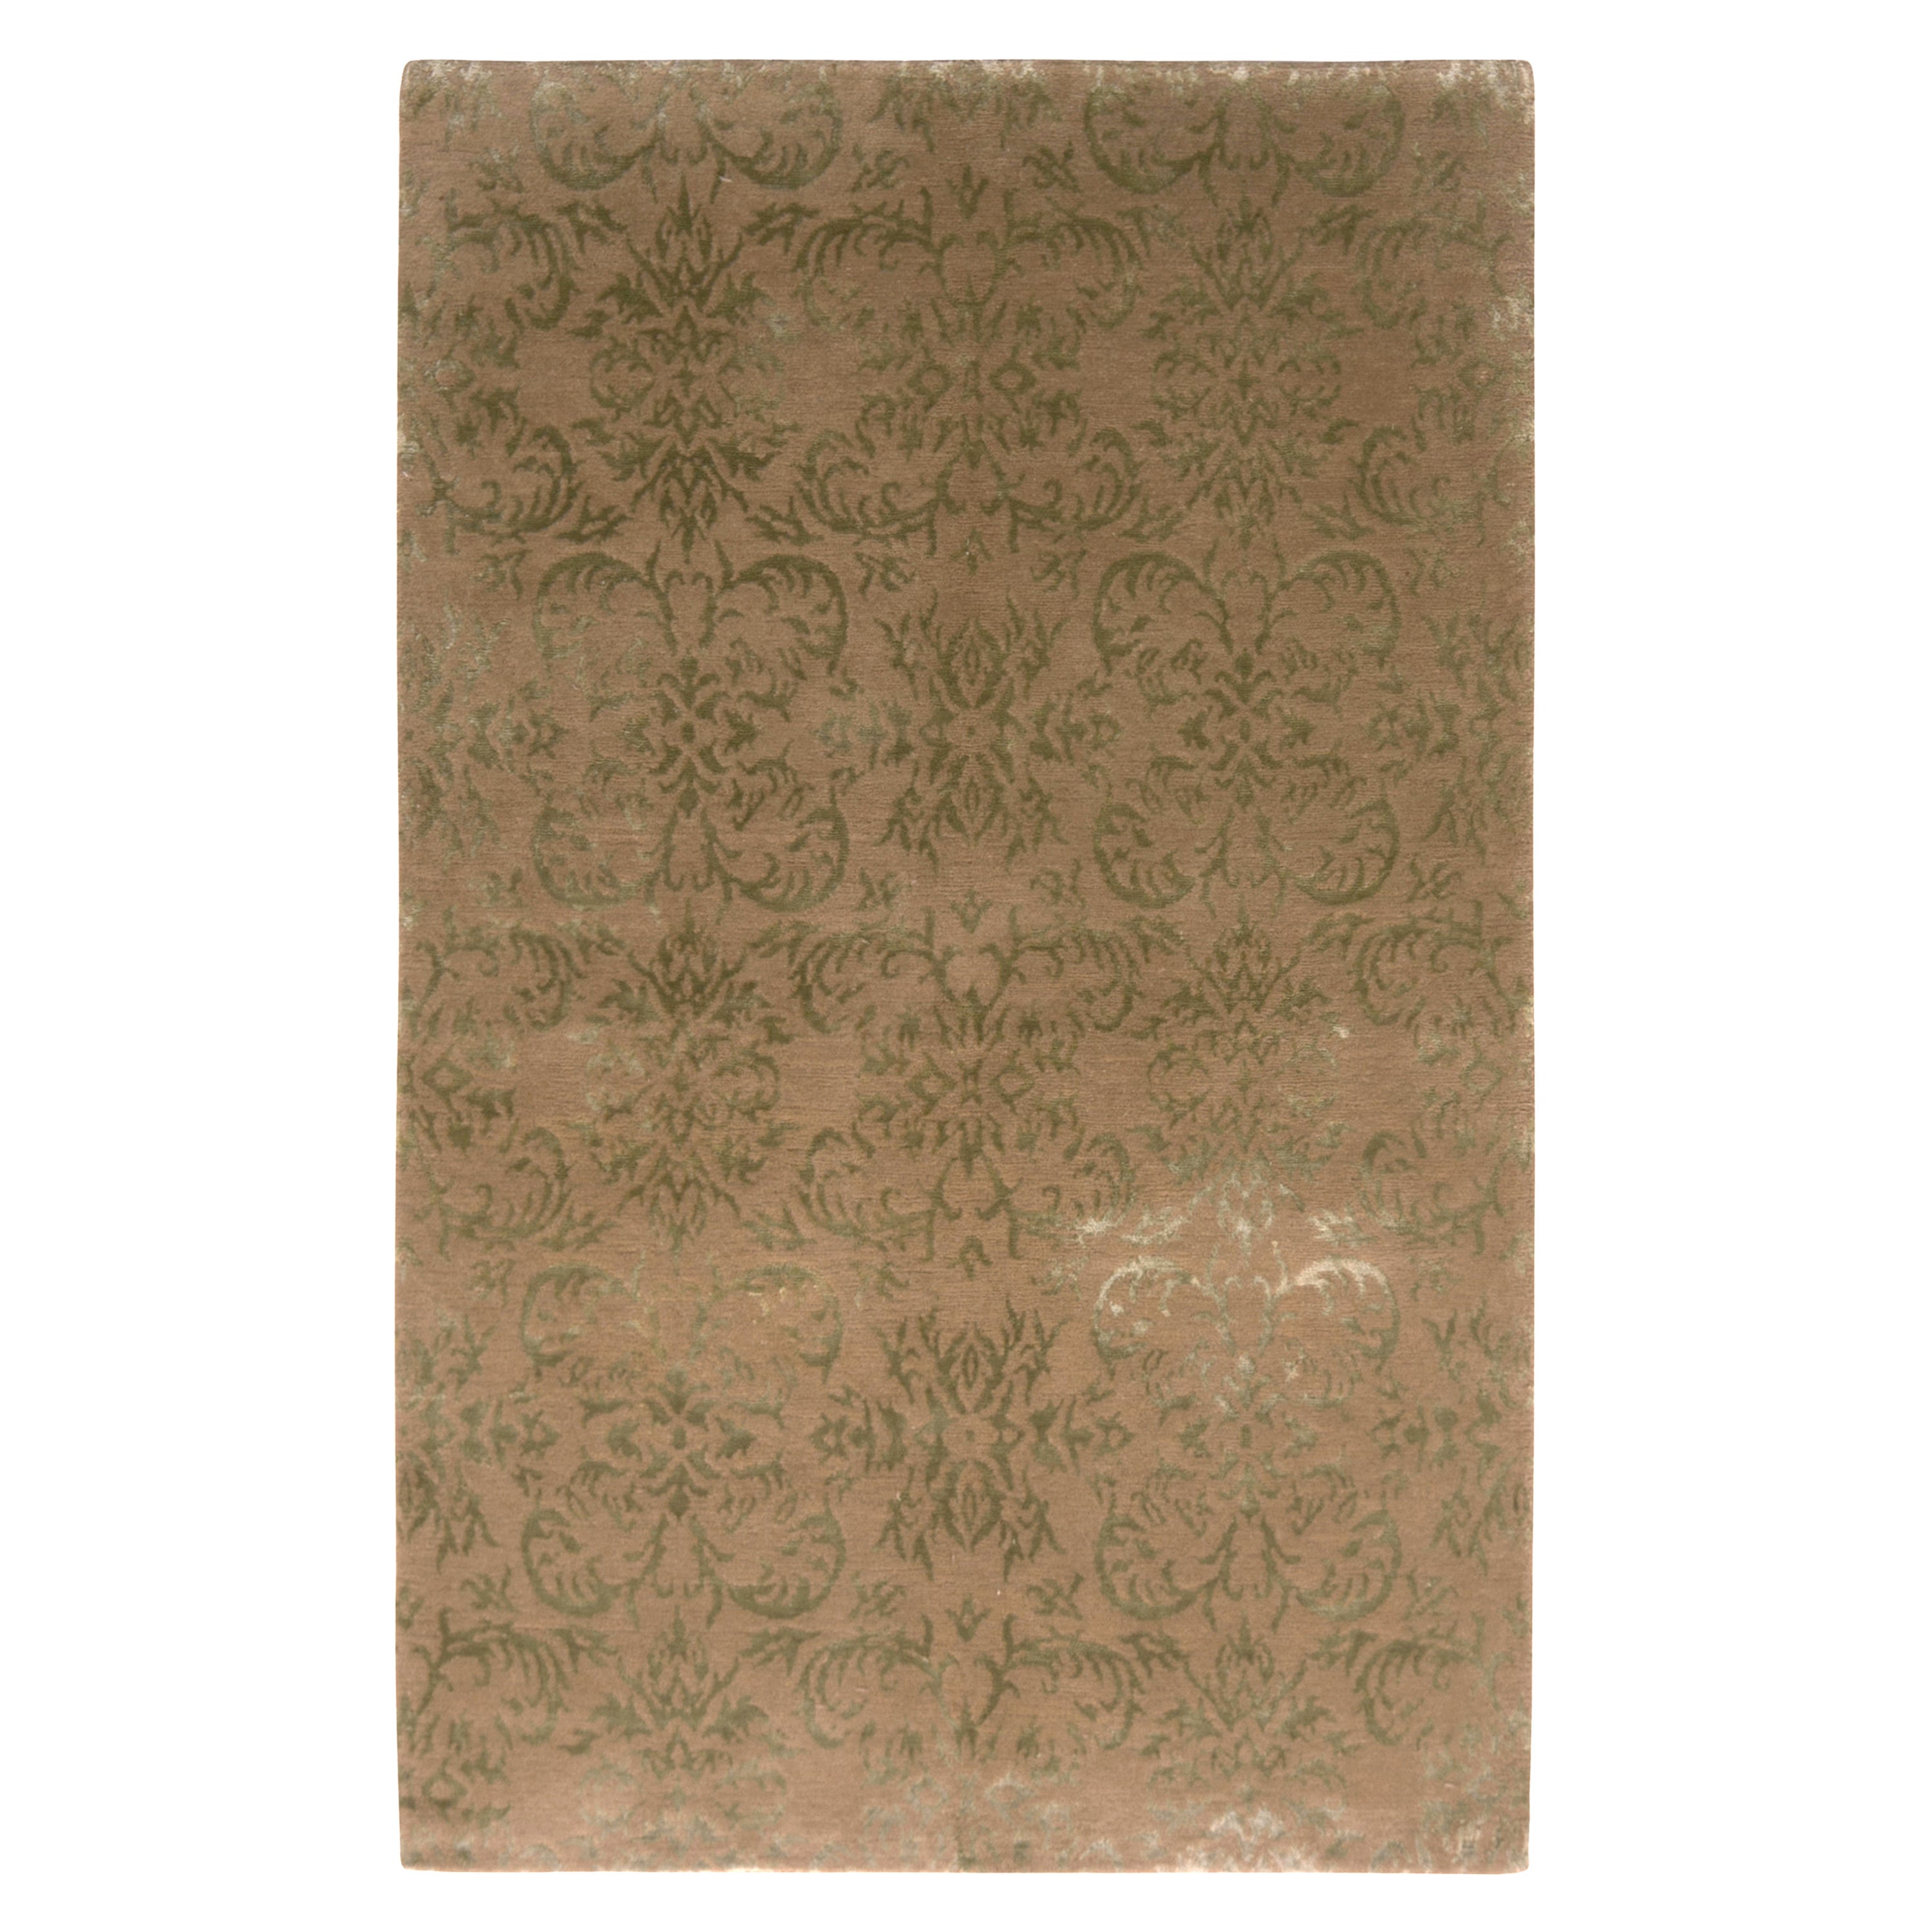 Rug & Kilim's Hand Knotted European Style Rug Beige-Brown Green Floral Pattern For Sale